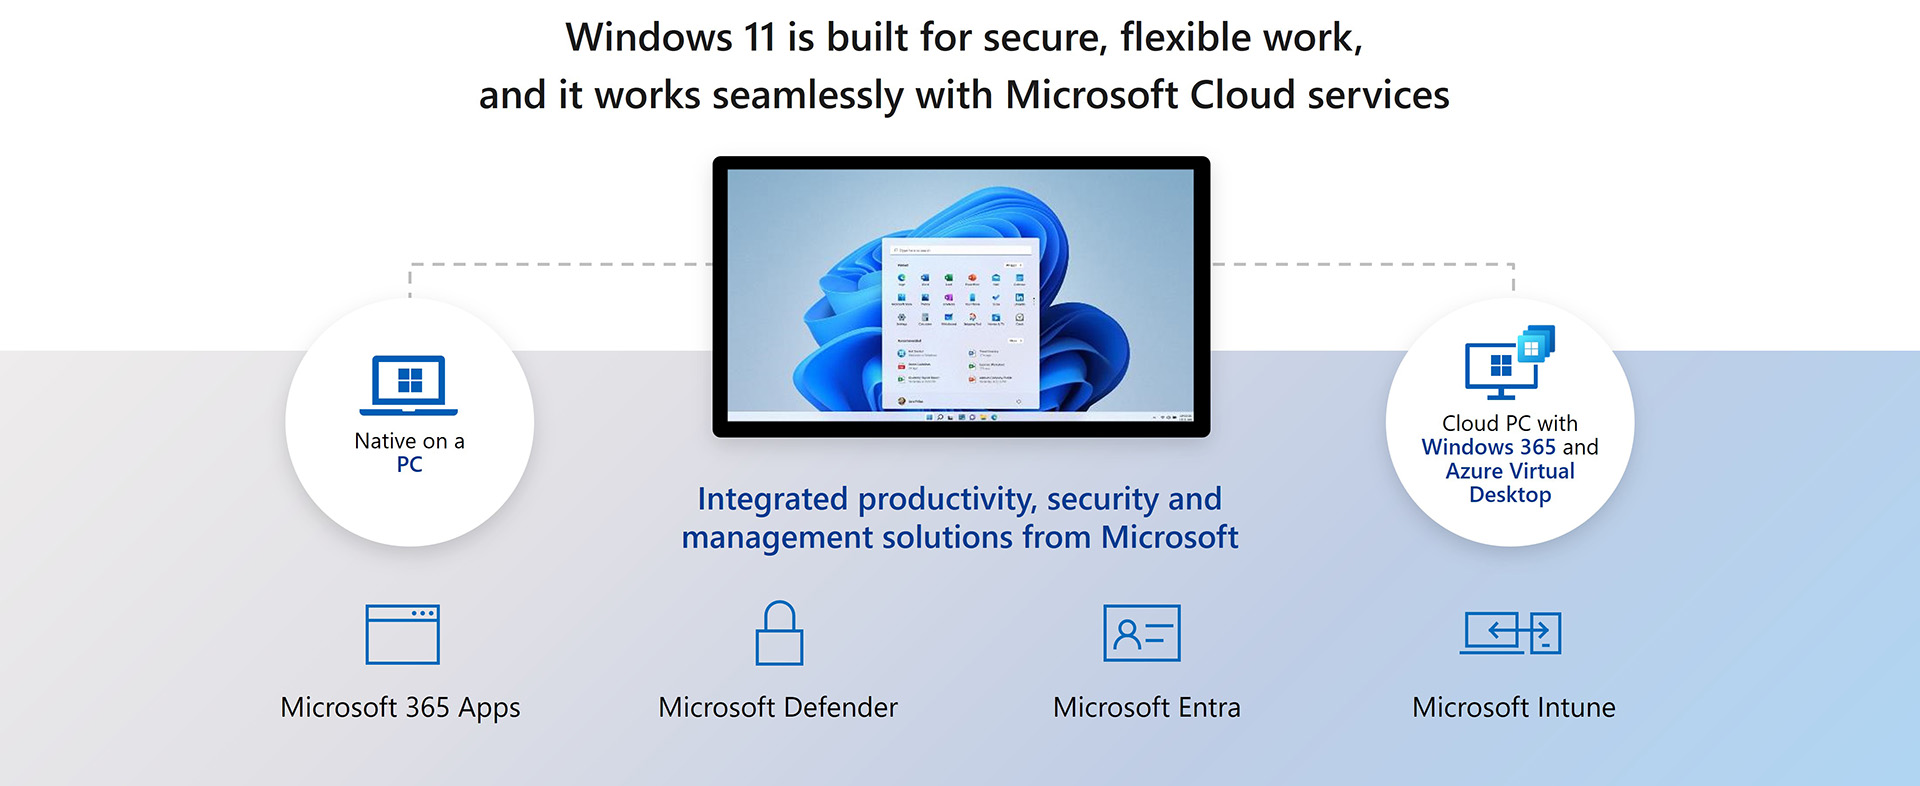 Block diagram showing how Windows 11 is built for secure, flexible work, working seamlessly with Microsoft Cloud services